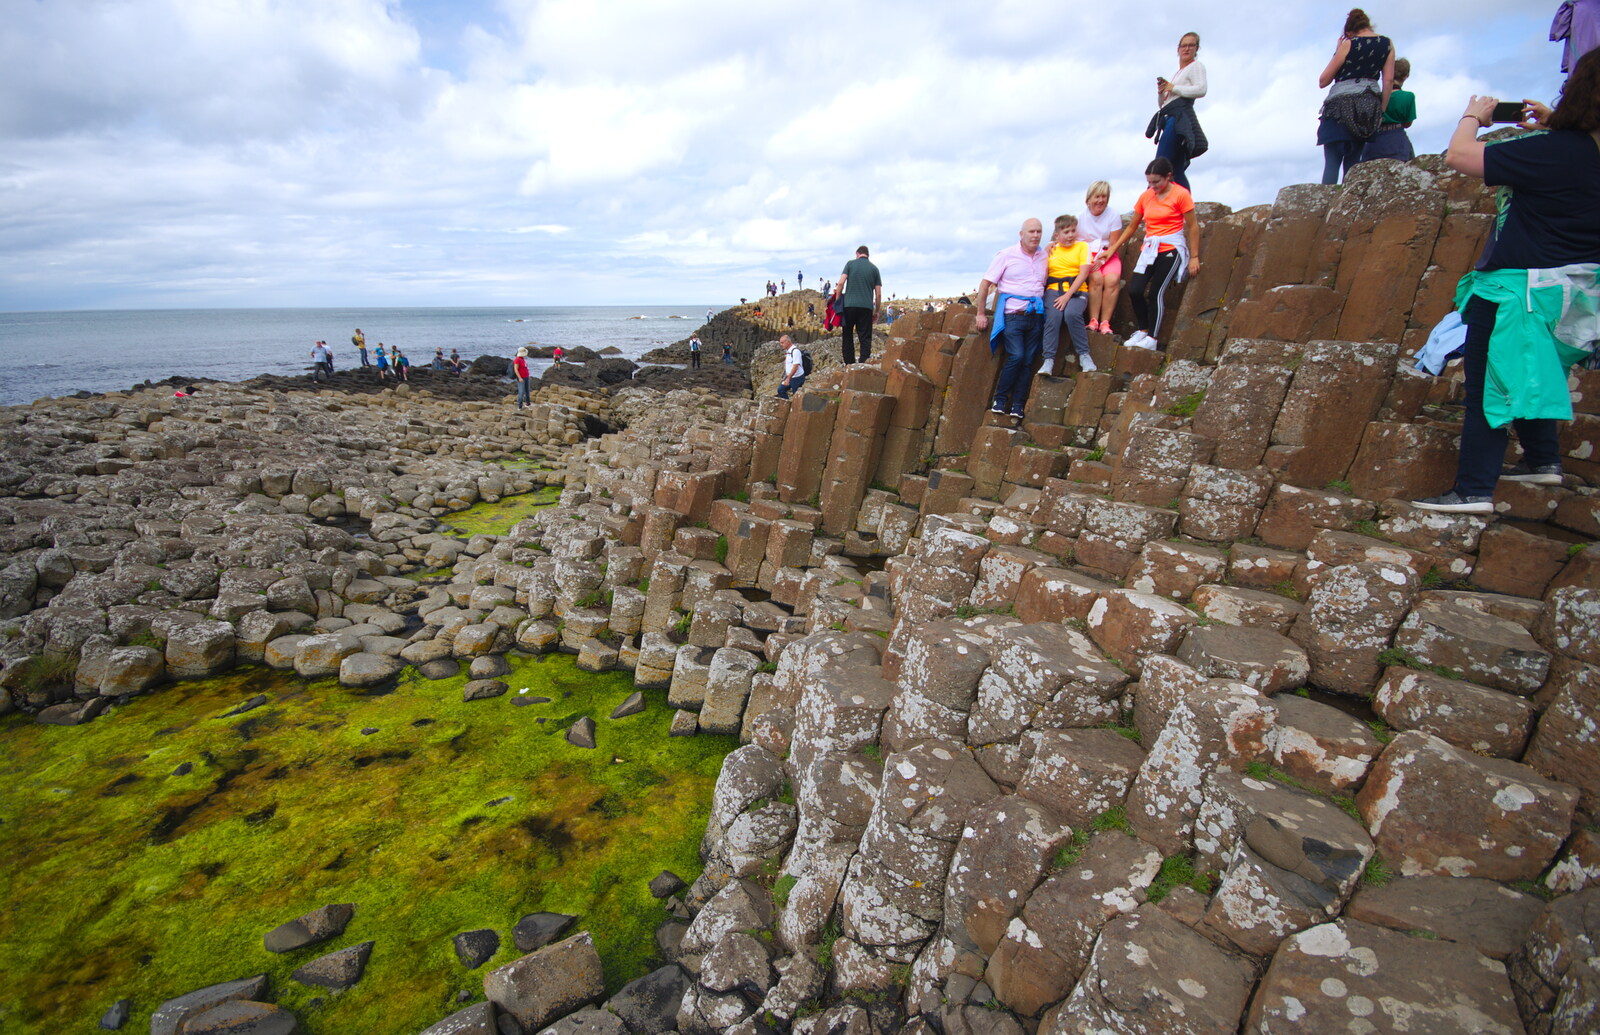 Hexagons all round from The Giant's Causeway, Bushmills, County Antrim, Northern Ireland - 14th August 2019